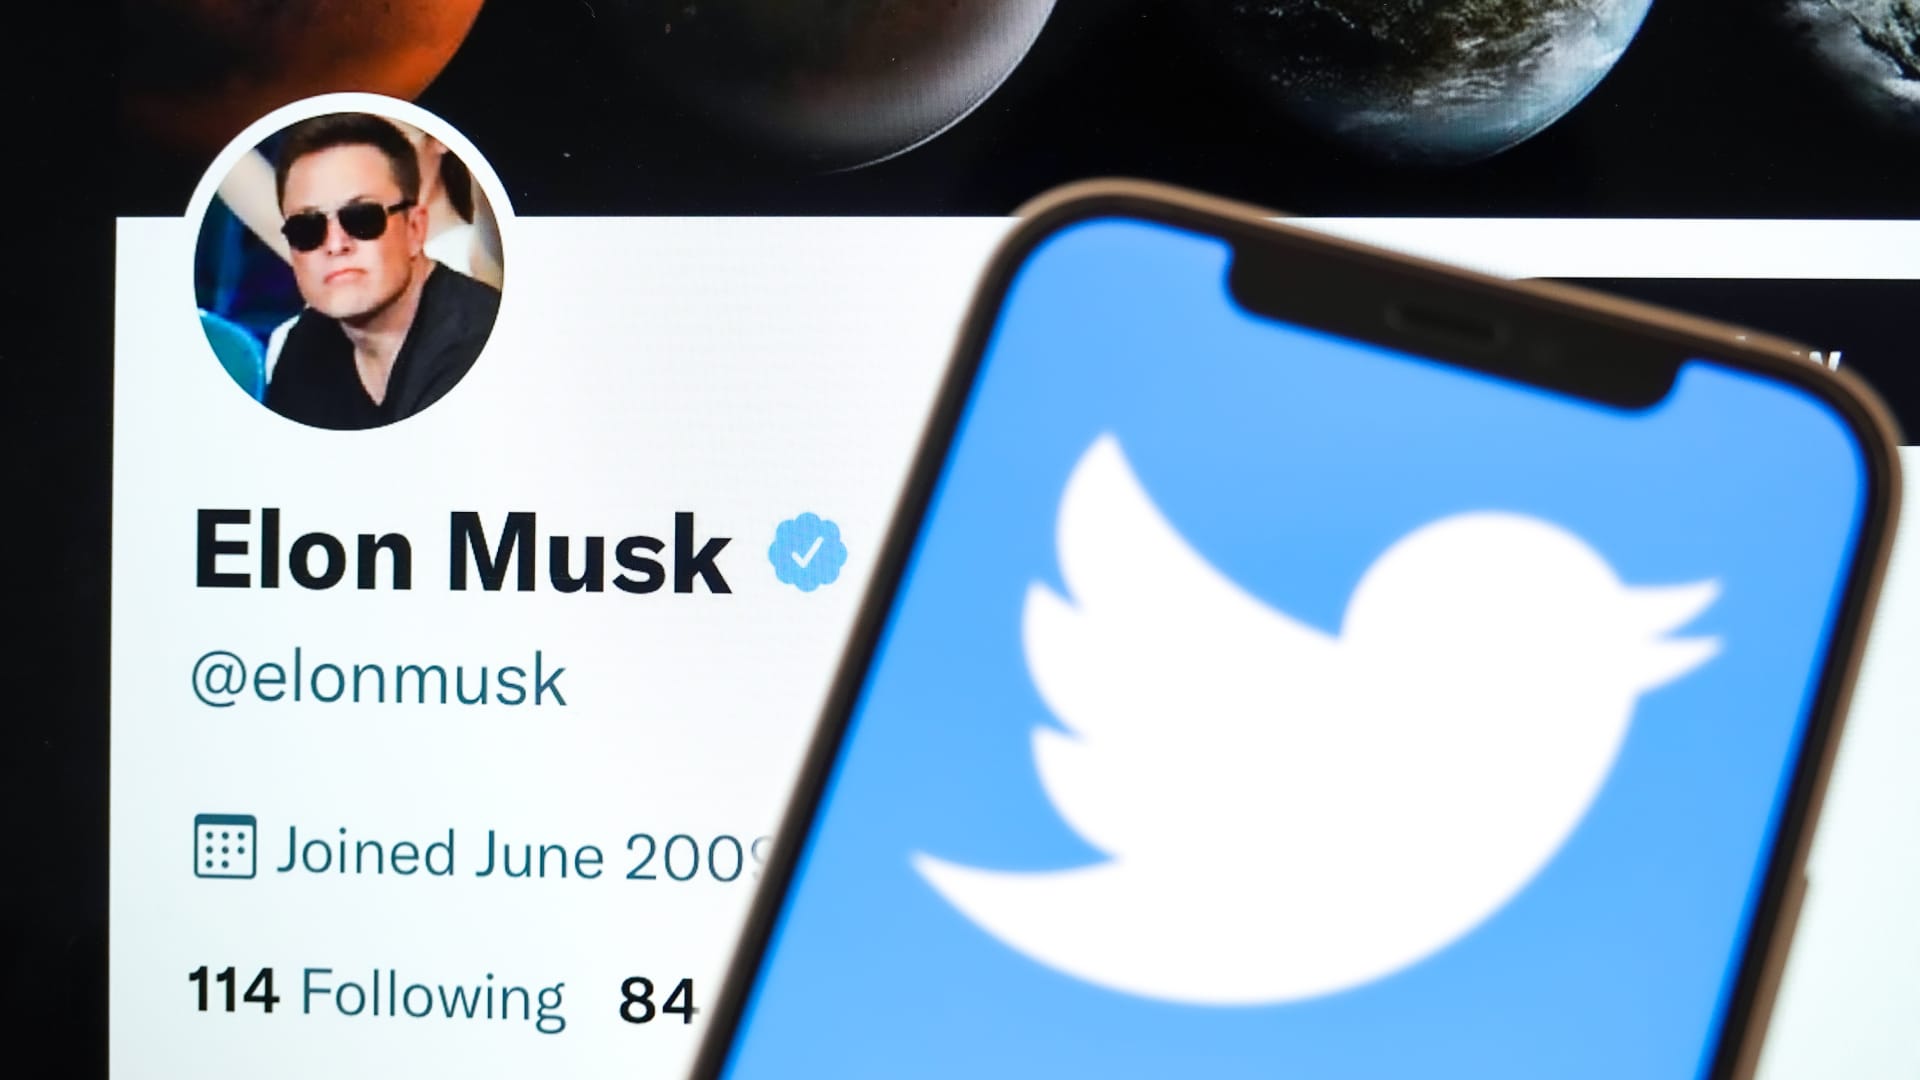 In this photo illustration, the Twitter logo is displayed on the screen of the phone, with Elon Musk's Twitter account in the background. Twitter was flooded with user reports of high-profile accounts losing thousands of followers in the hours after news broke that Tesla CEO Elon Musk would purchase the social network.